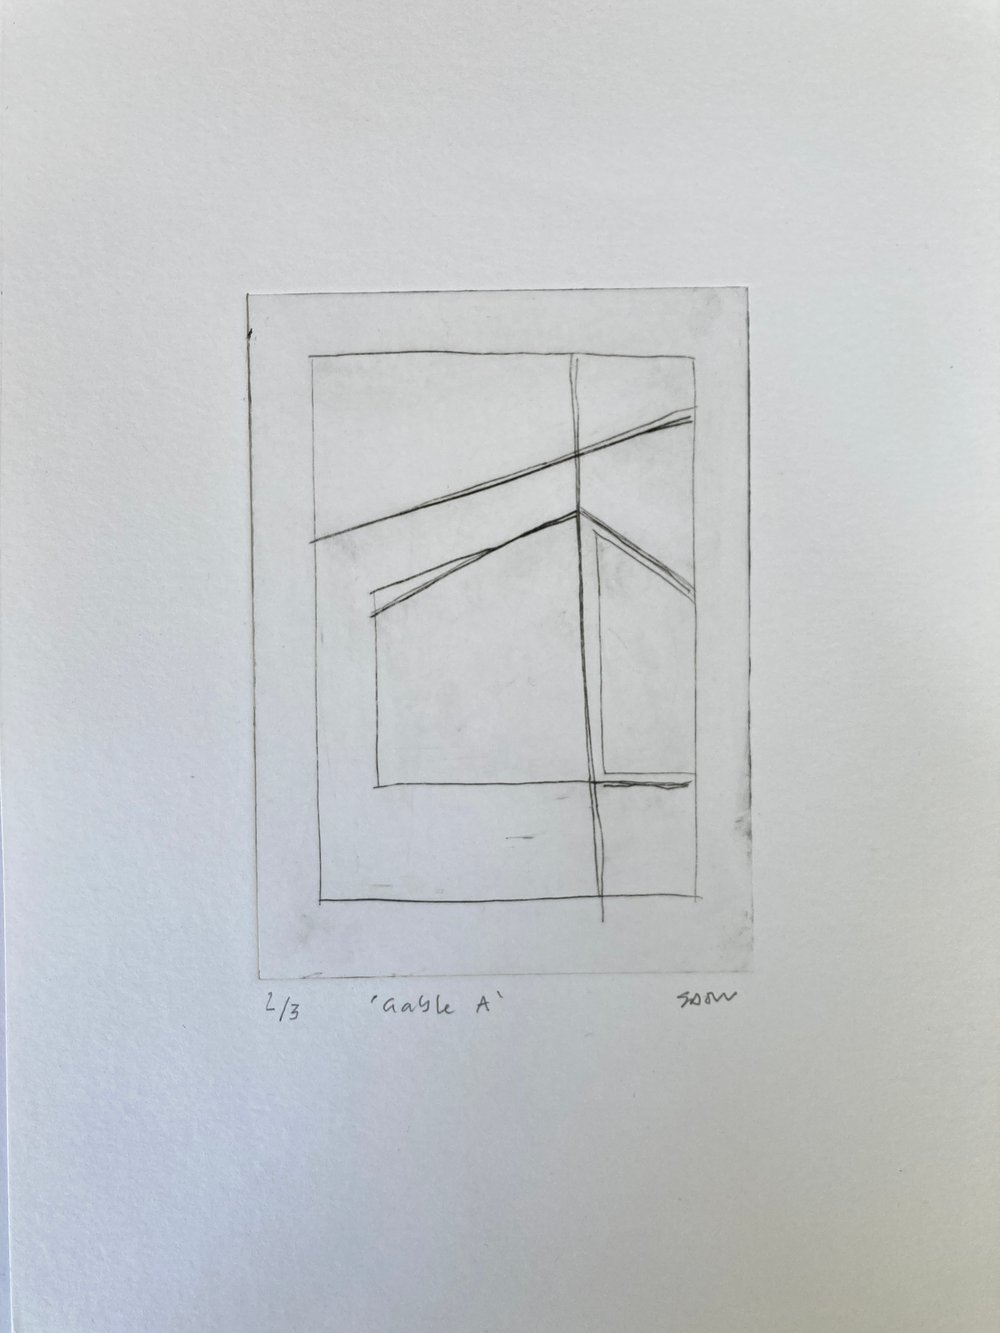 Image of Gable A drypoint print